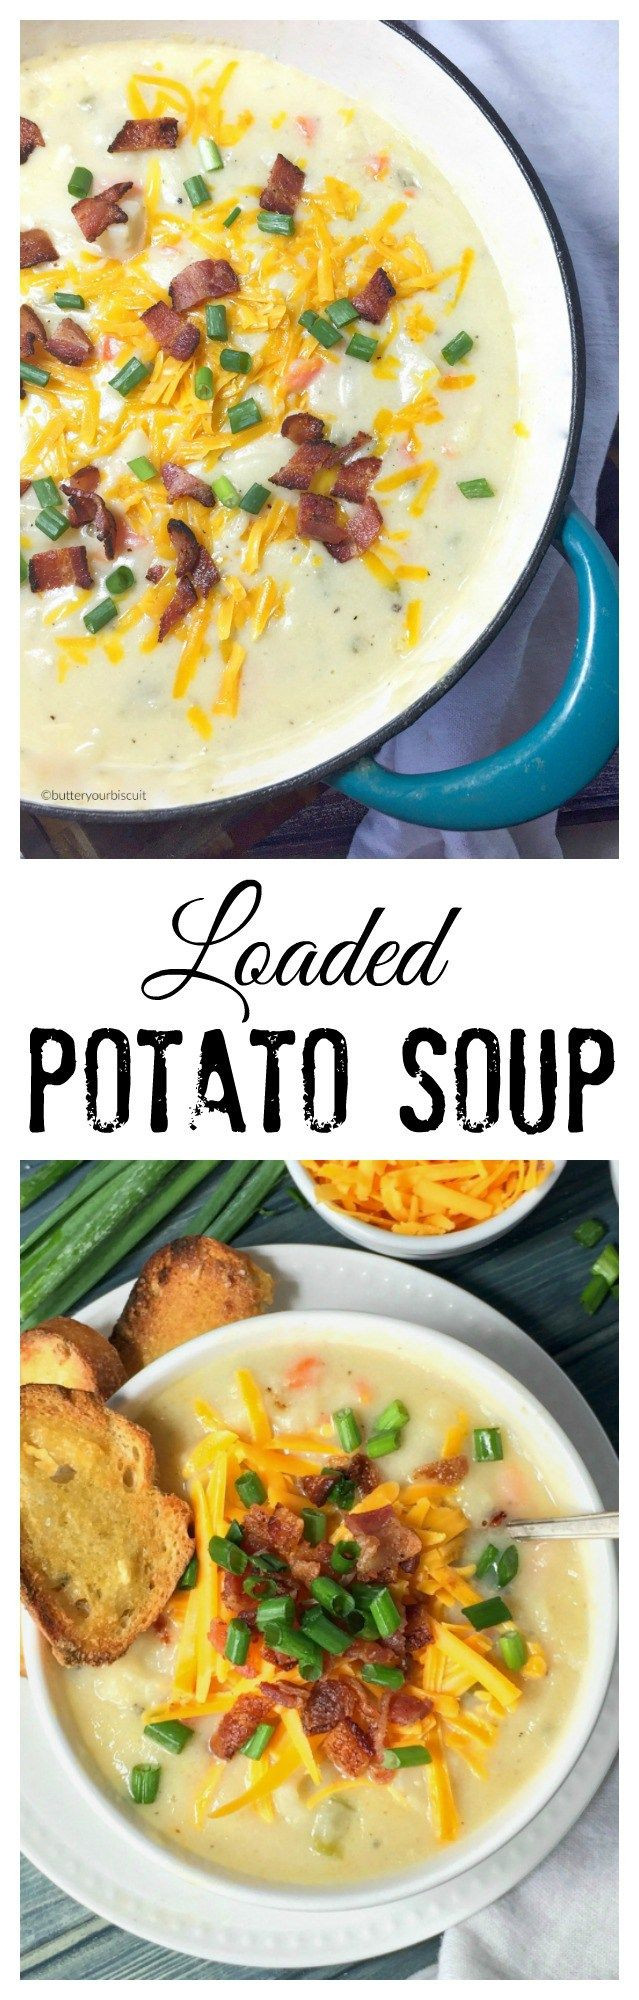 The Best Loaded Baked Potato soup Paula Deen – Easy Recipes To Make at Home